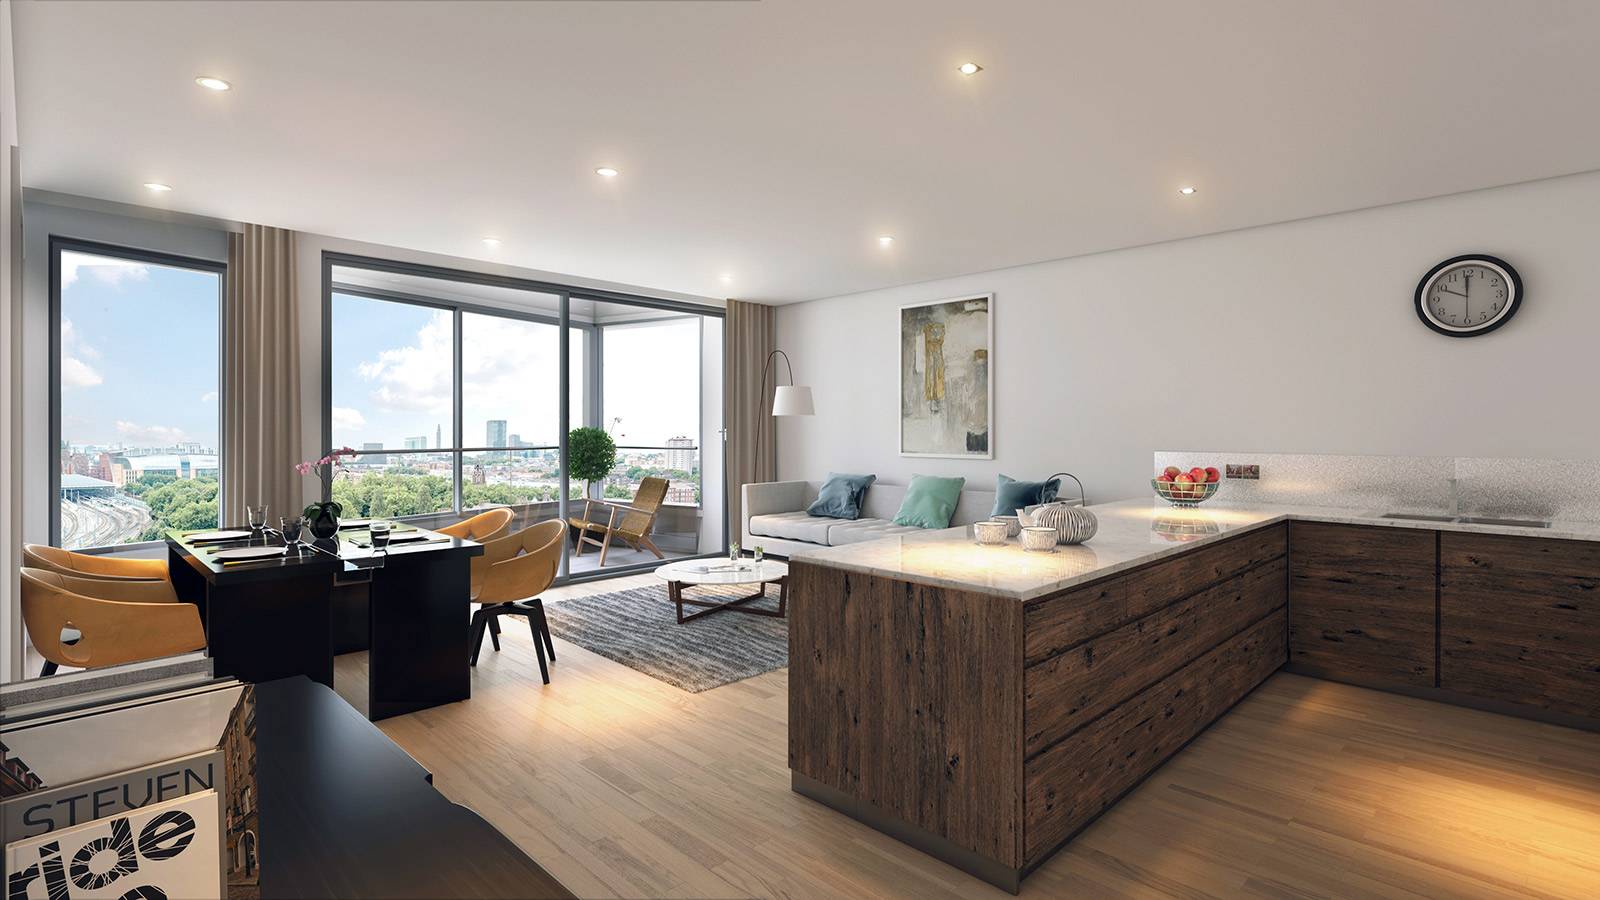 3 bedroom apartment in The Onyx - New London Development in N1